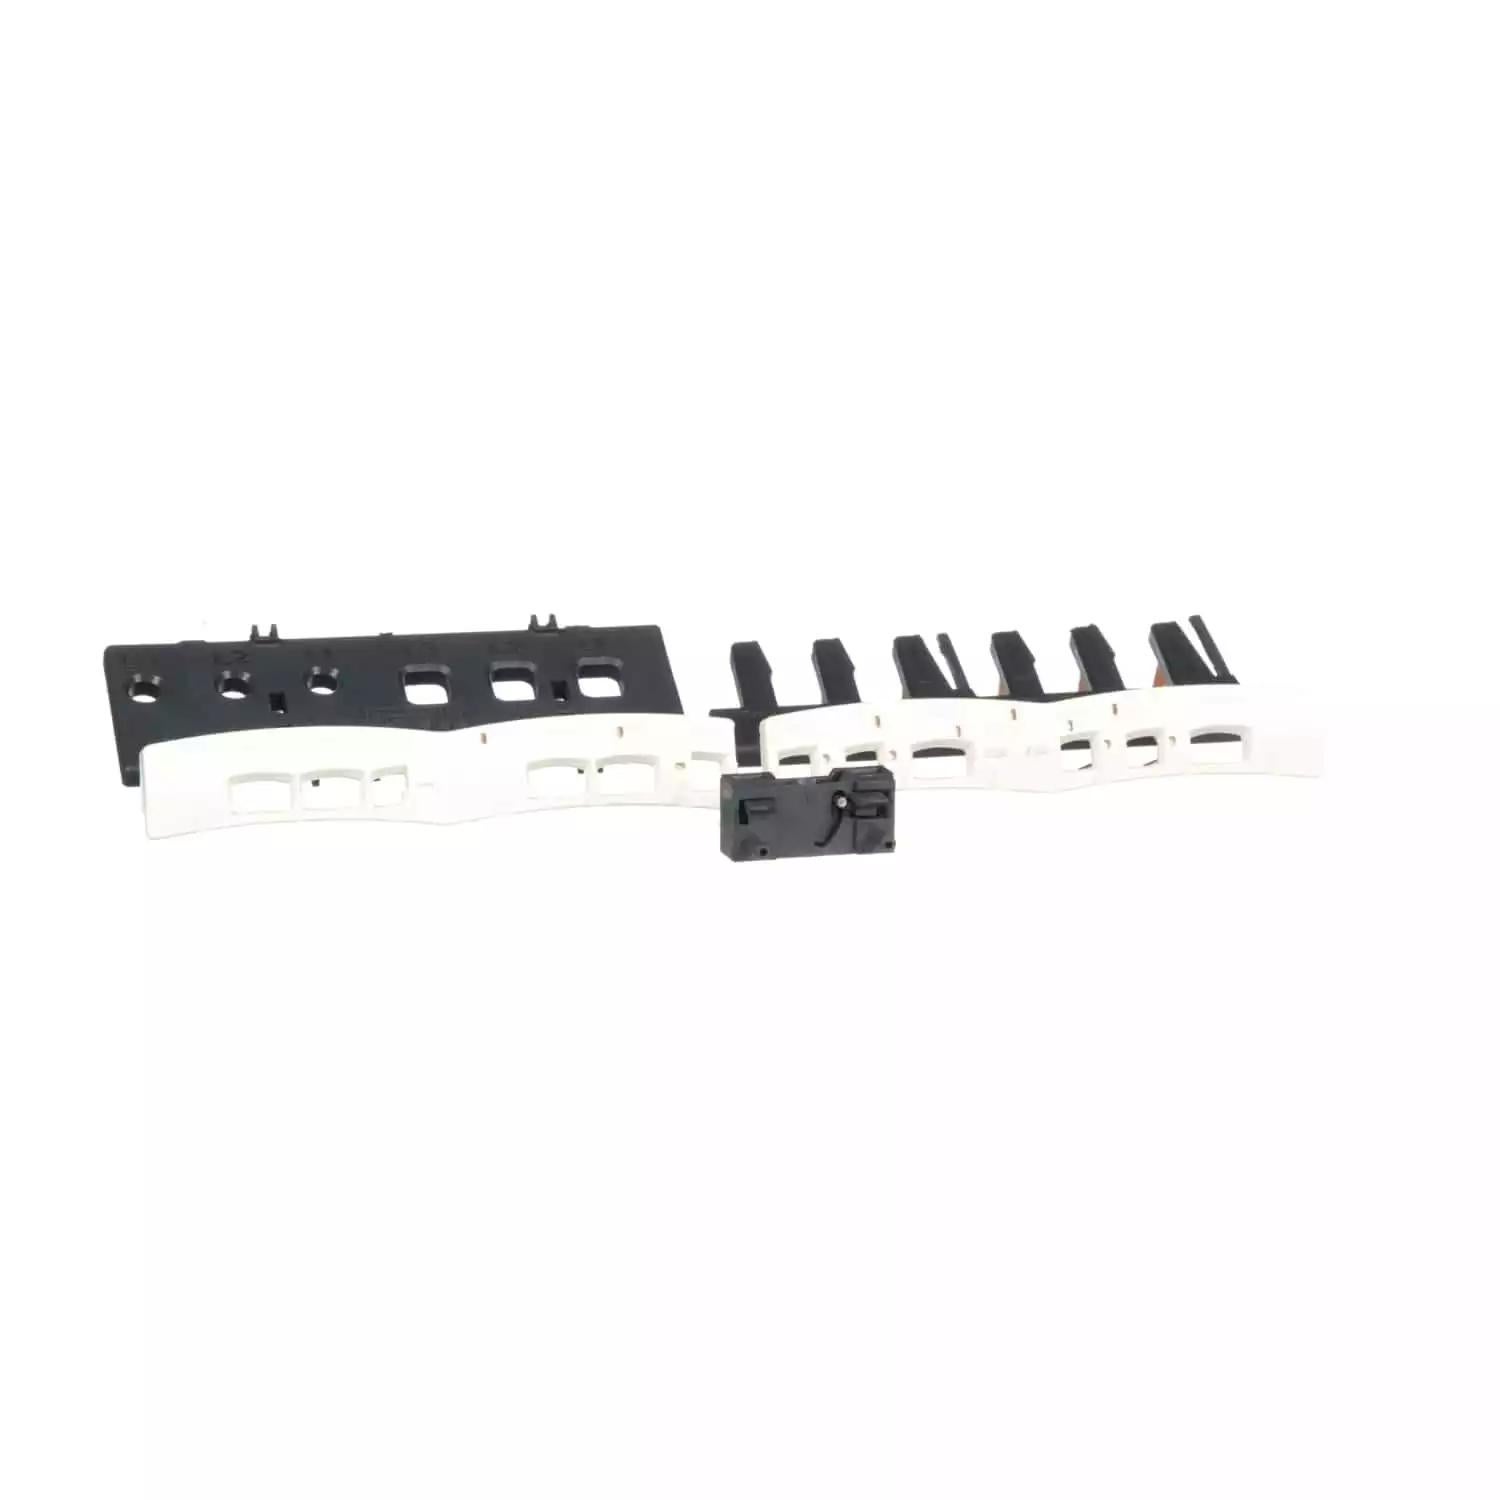 Kit for assembling 3P reversing contactors, LC1D09-D38 with screw clamp terminals, with electrical interlock